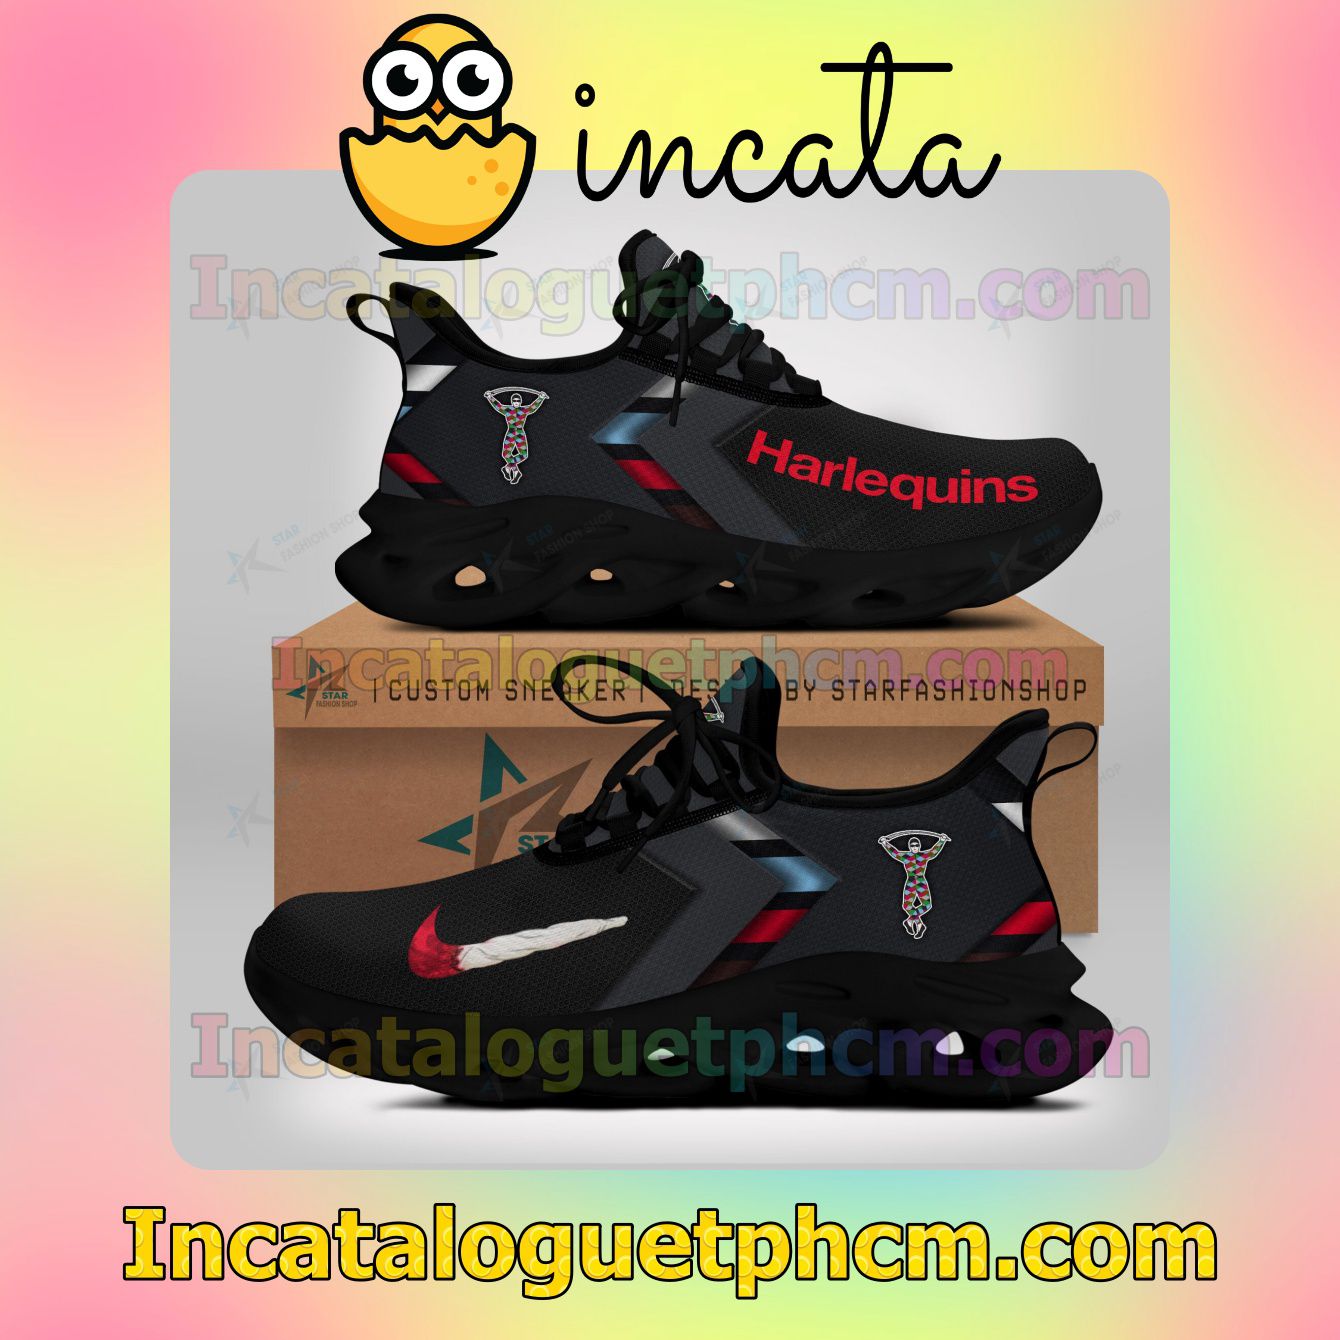 New Harlequins Women Fashion Sneakers